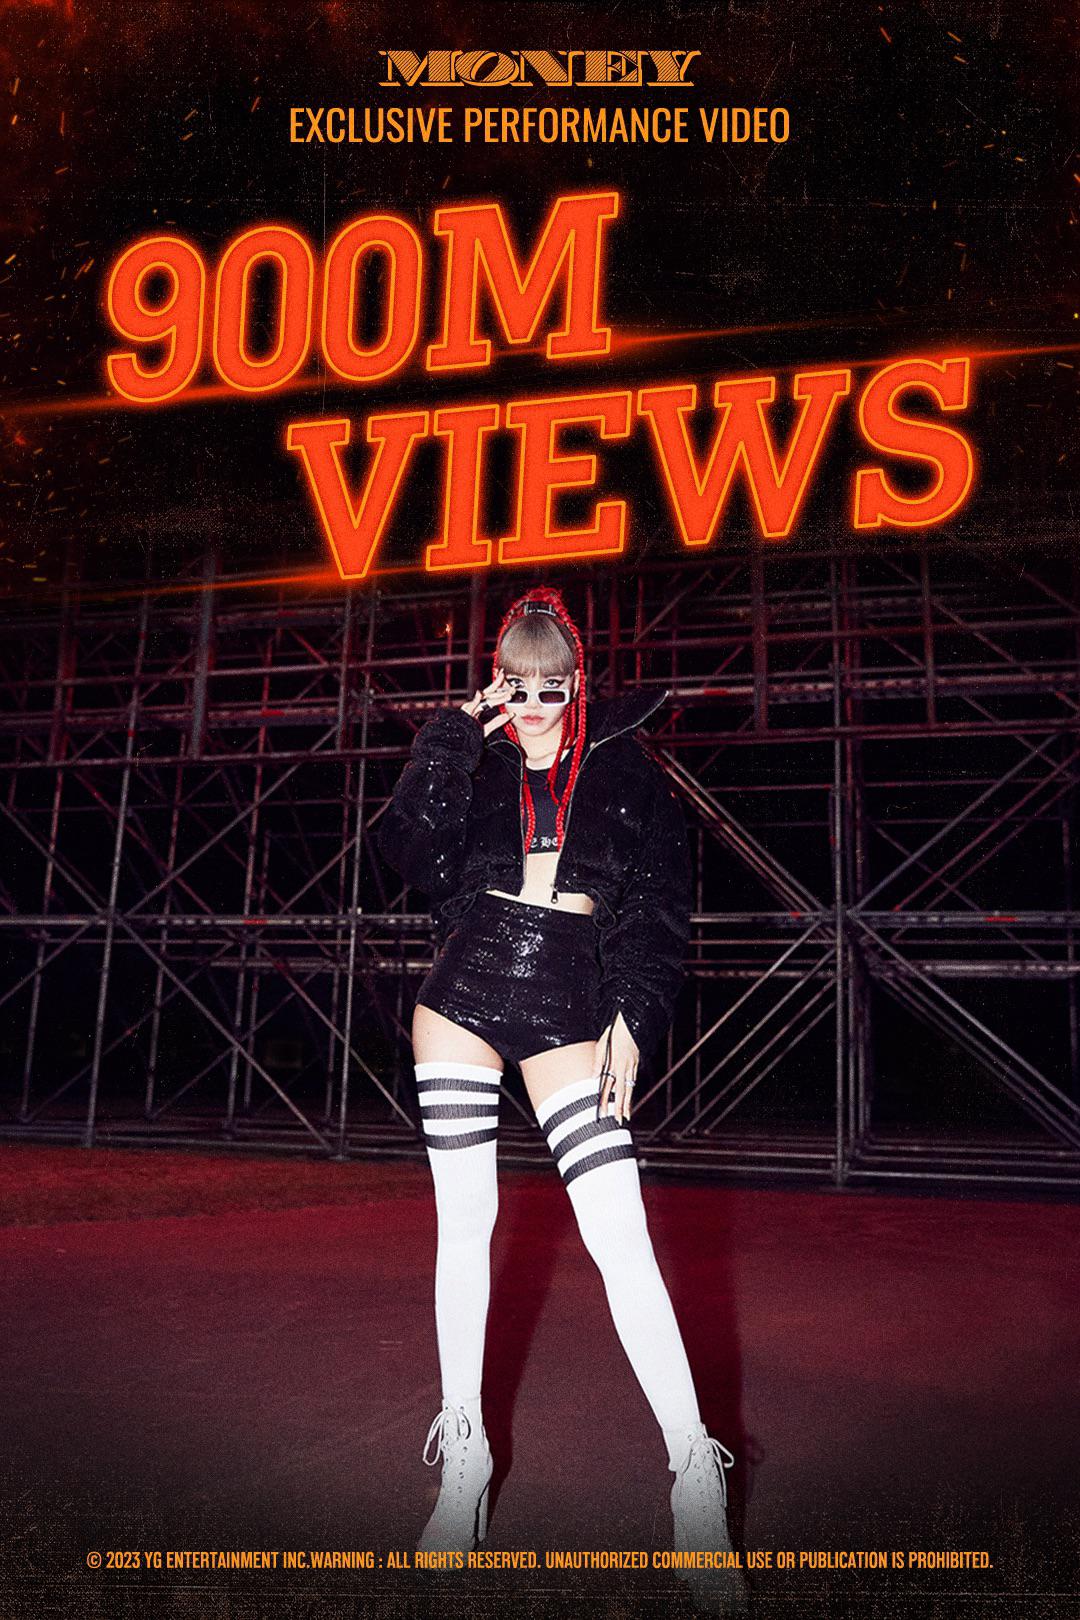 230919 LISA - ‘MONEY’ EXCLUSIVE PERFORMANCE VIDEO hits 900 MILLION VIEWS on Youtube! [Official Poster]